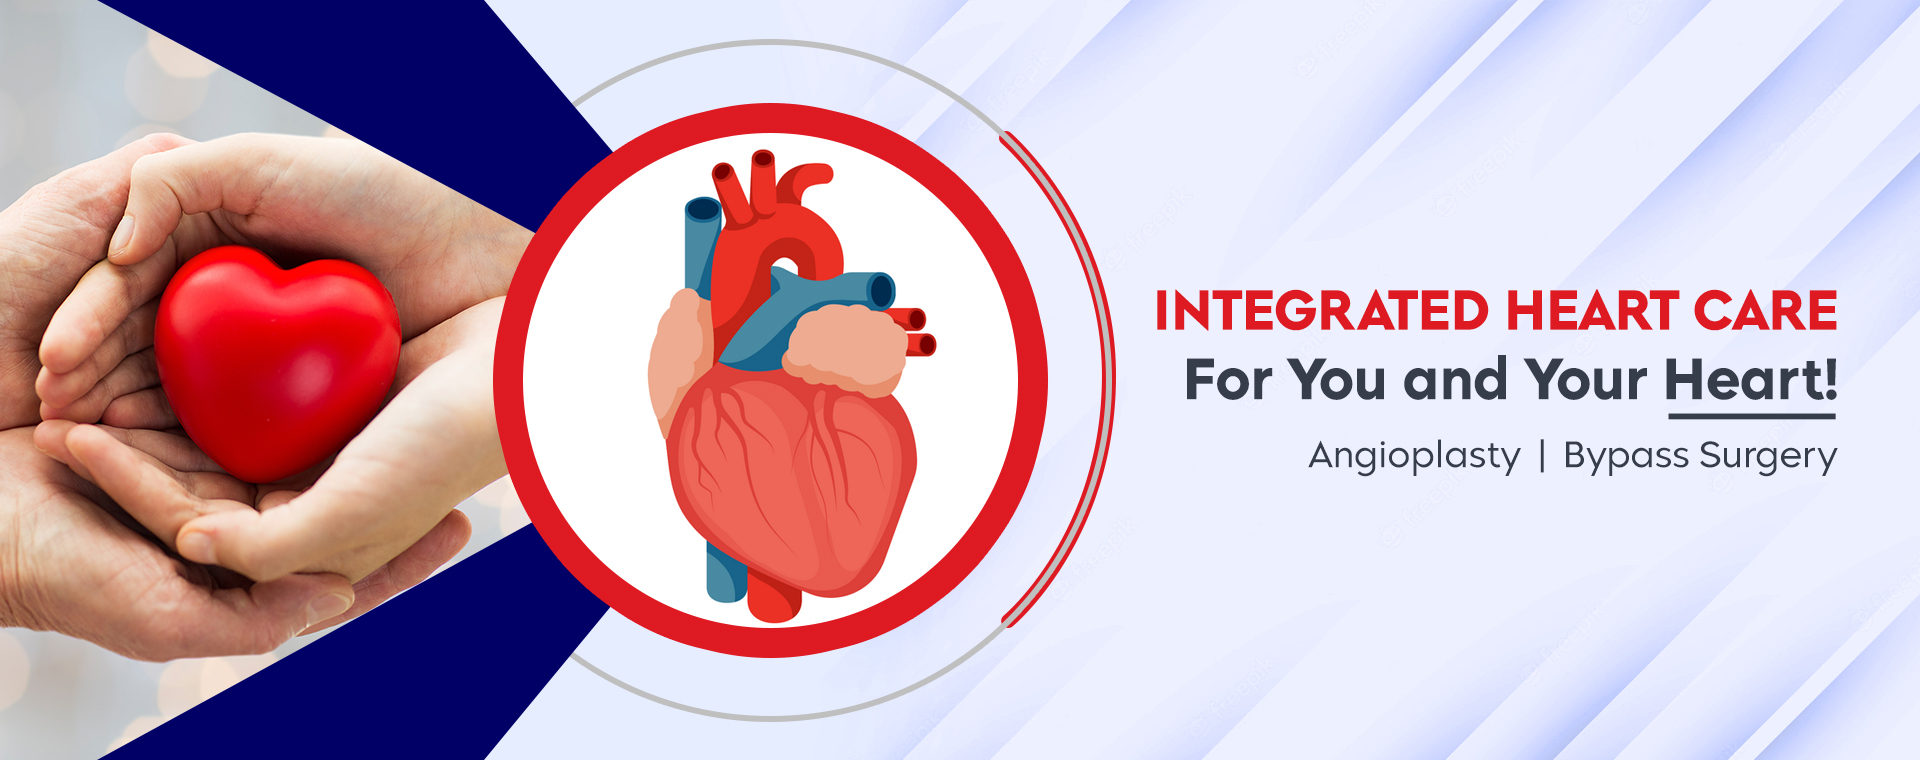 Best Cardiologist for Angioplasty and Bypass Surgery in Navi Mumbai 